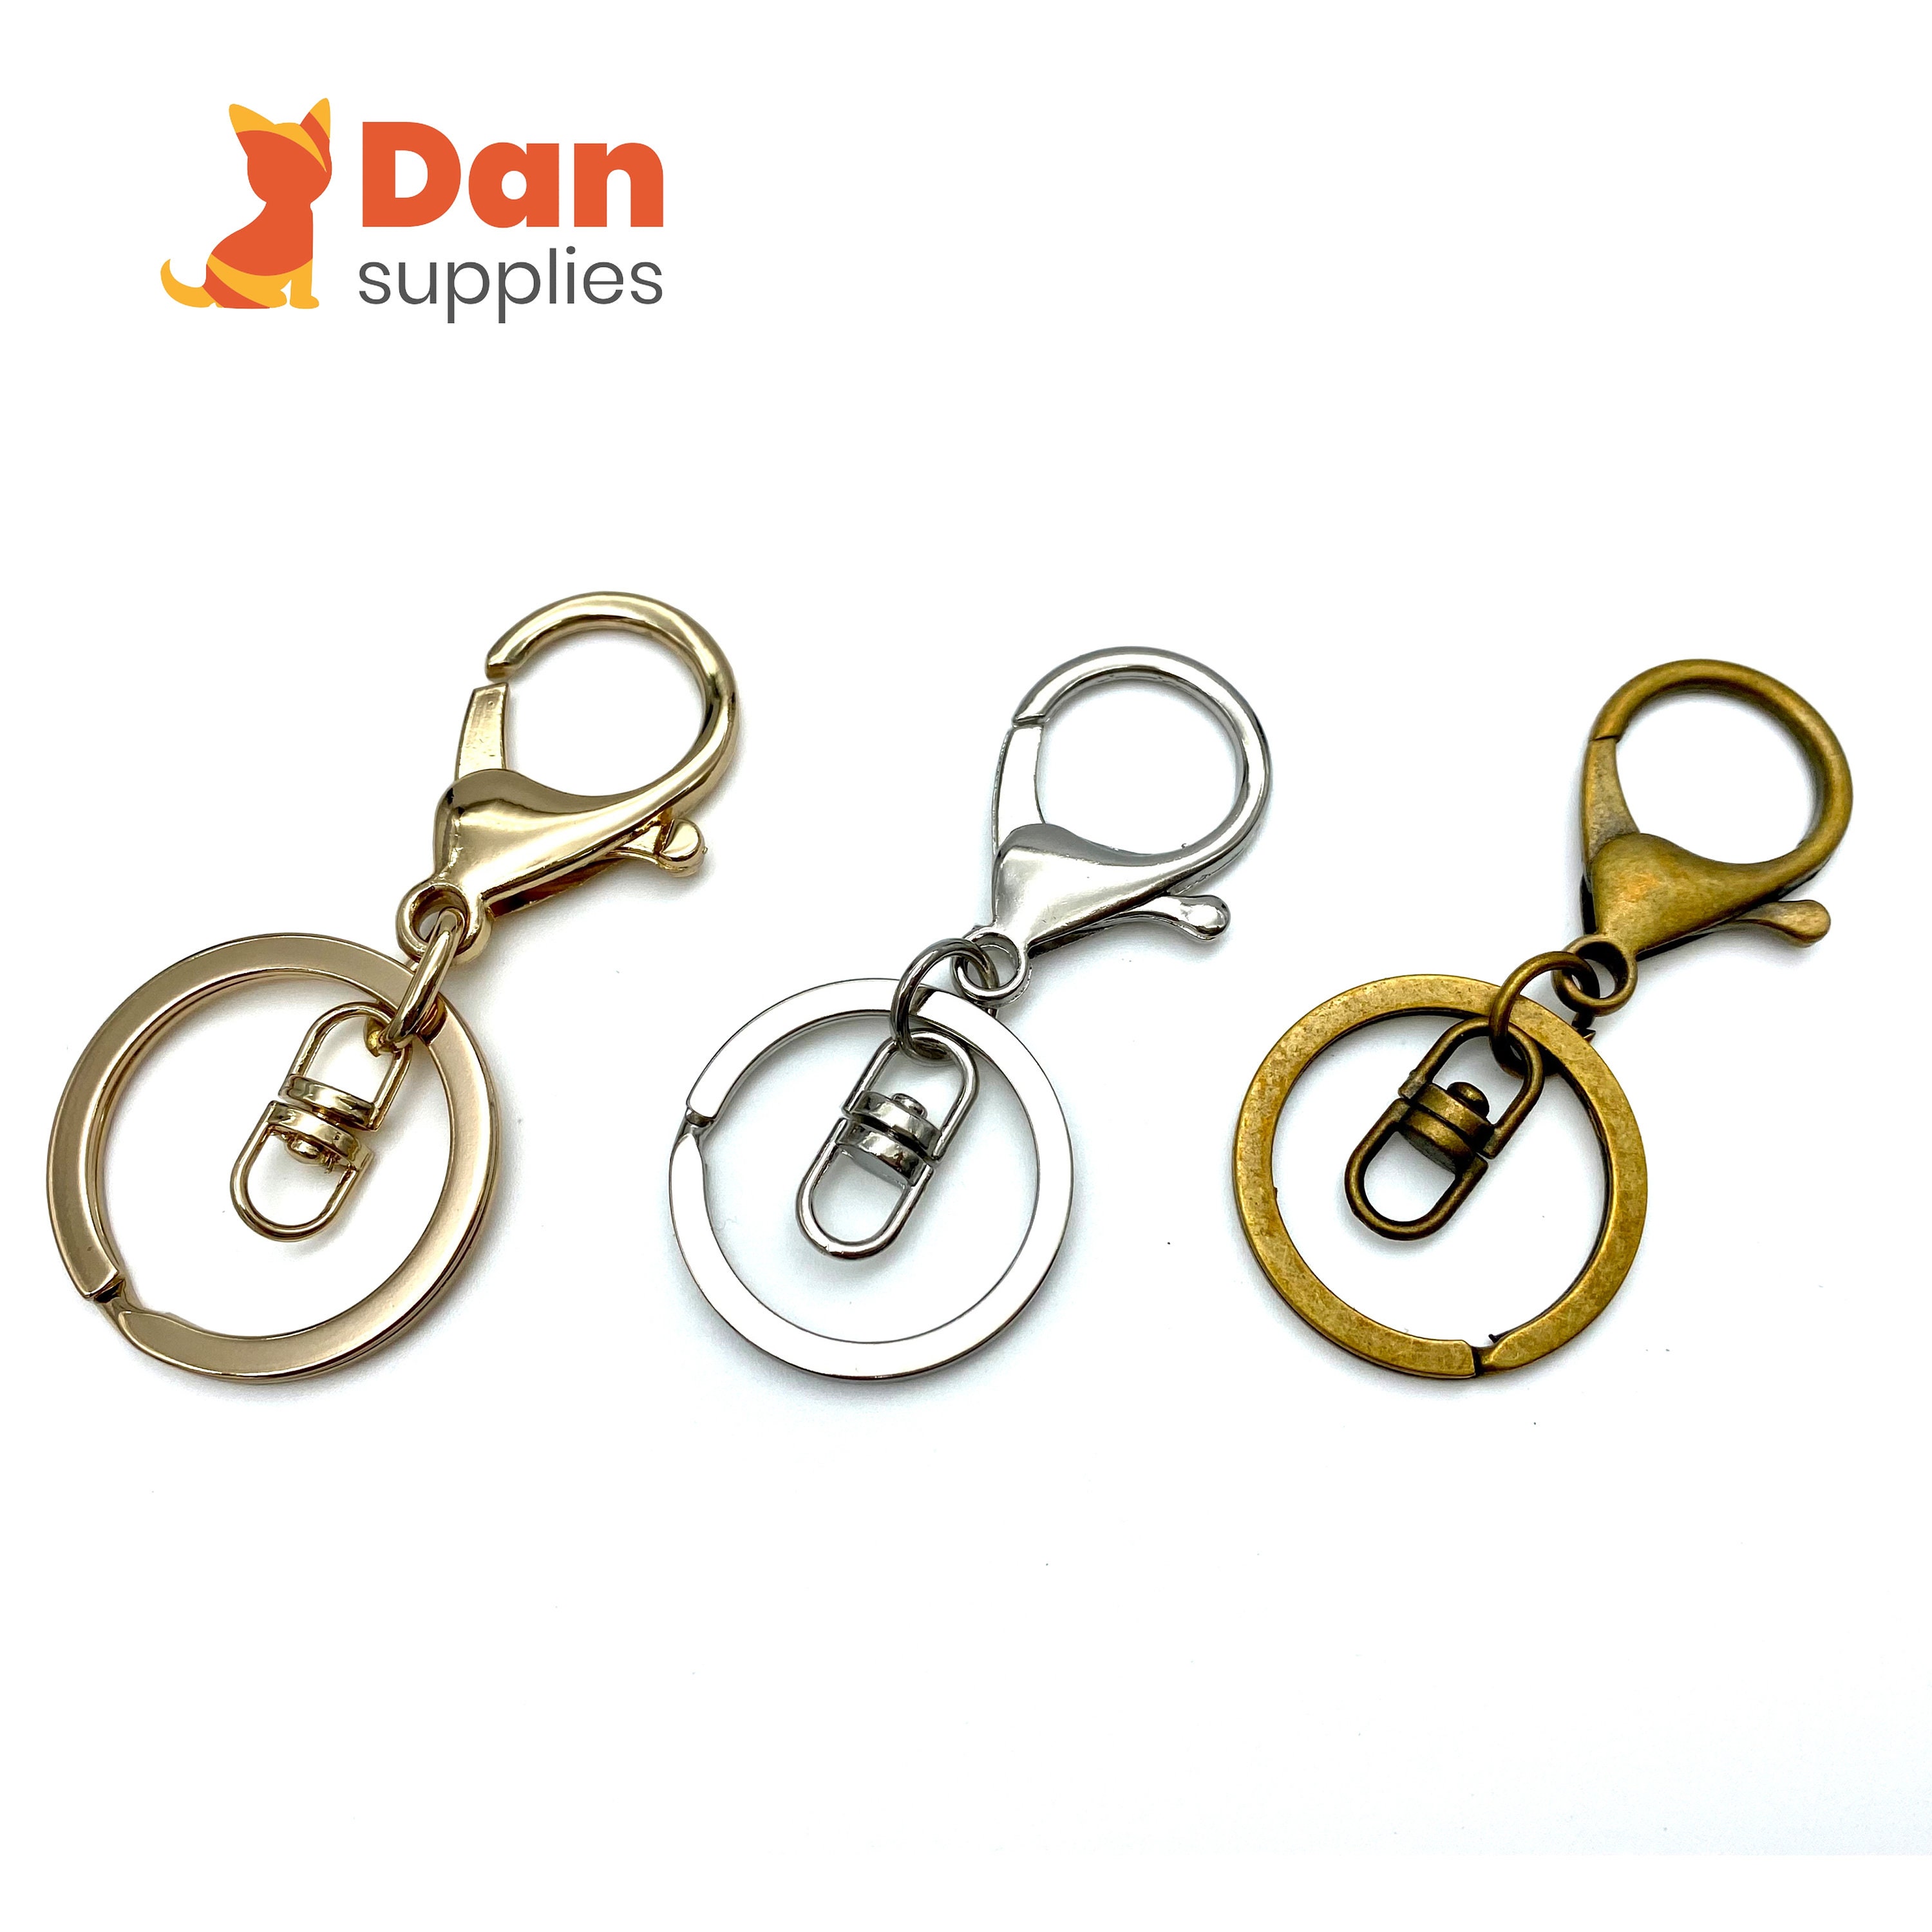 30mm Split Key Ring Clips In Bronze And Rhodium Gold For DIY Metal Keychain  Making With Lobster Clasp From Likegrace, $2.71